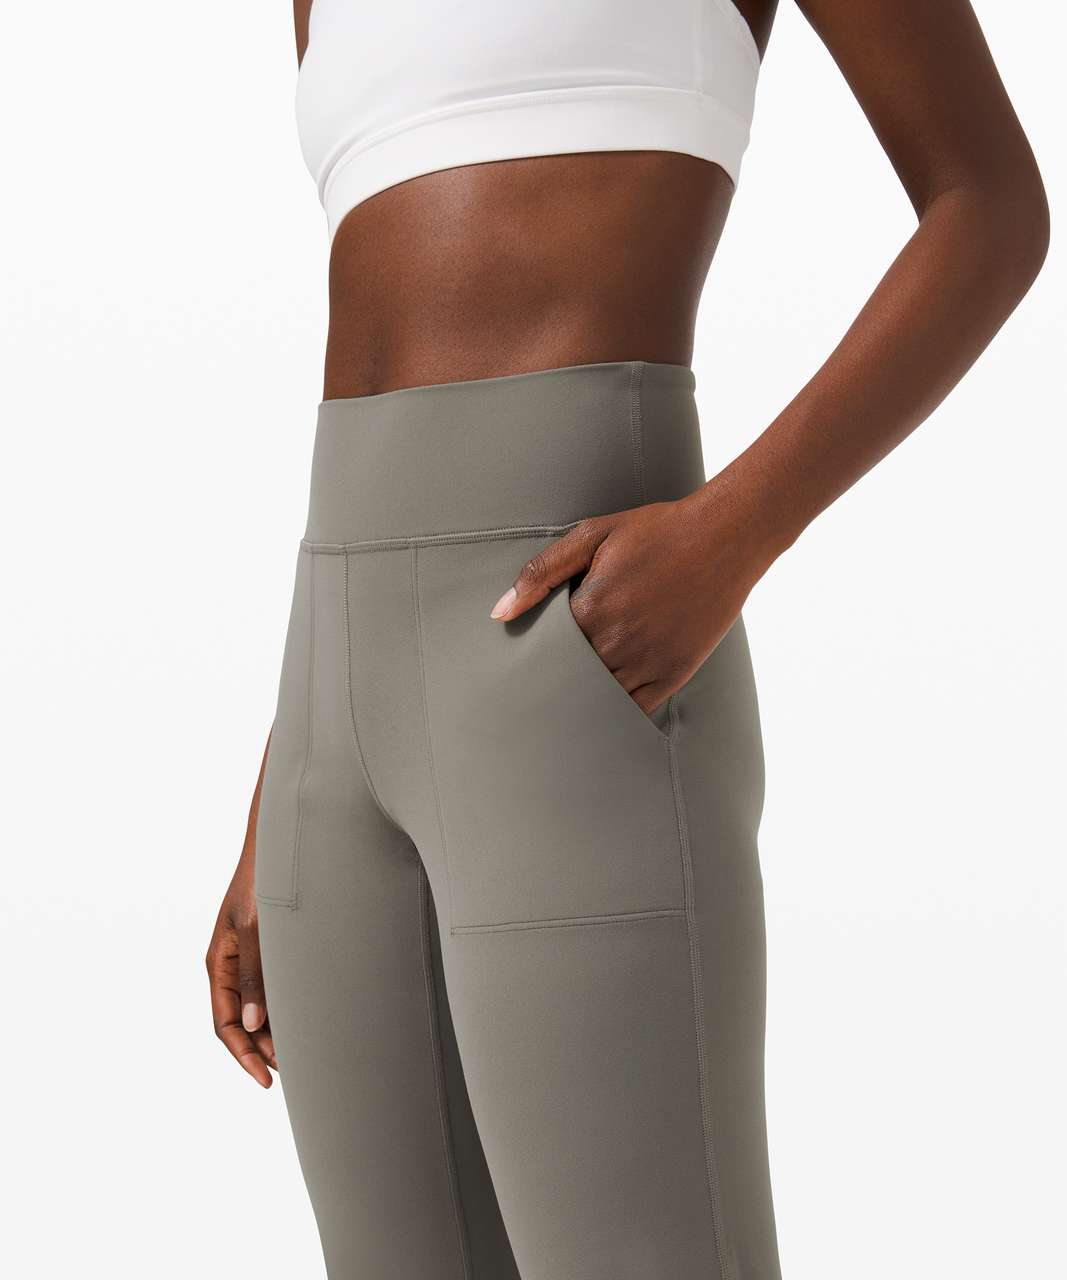 How much Grey Sage is too much Grey Sage? Align Joggers (8) + LS